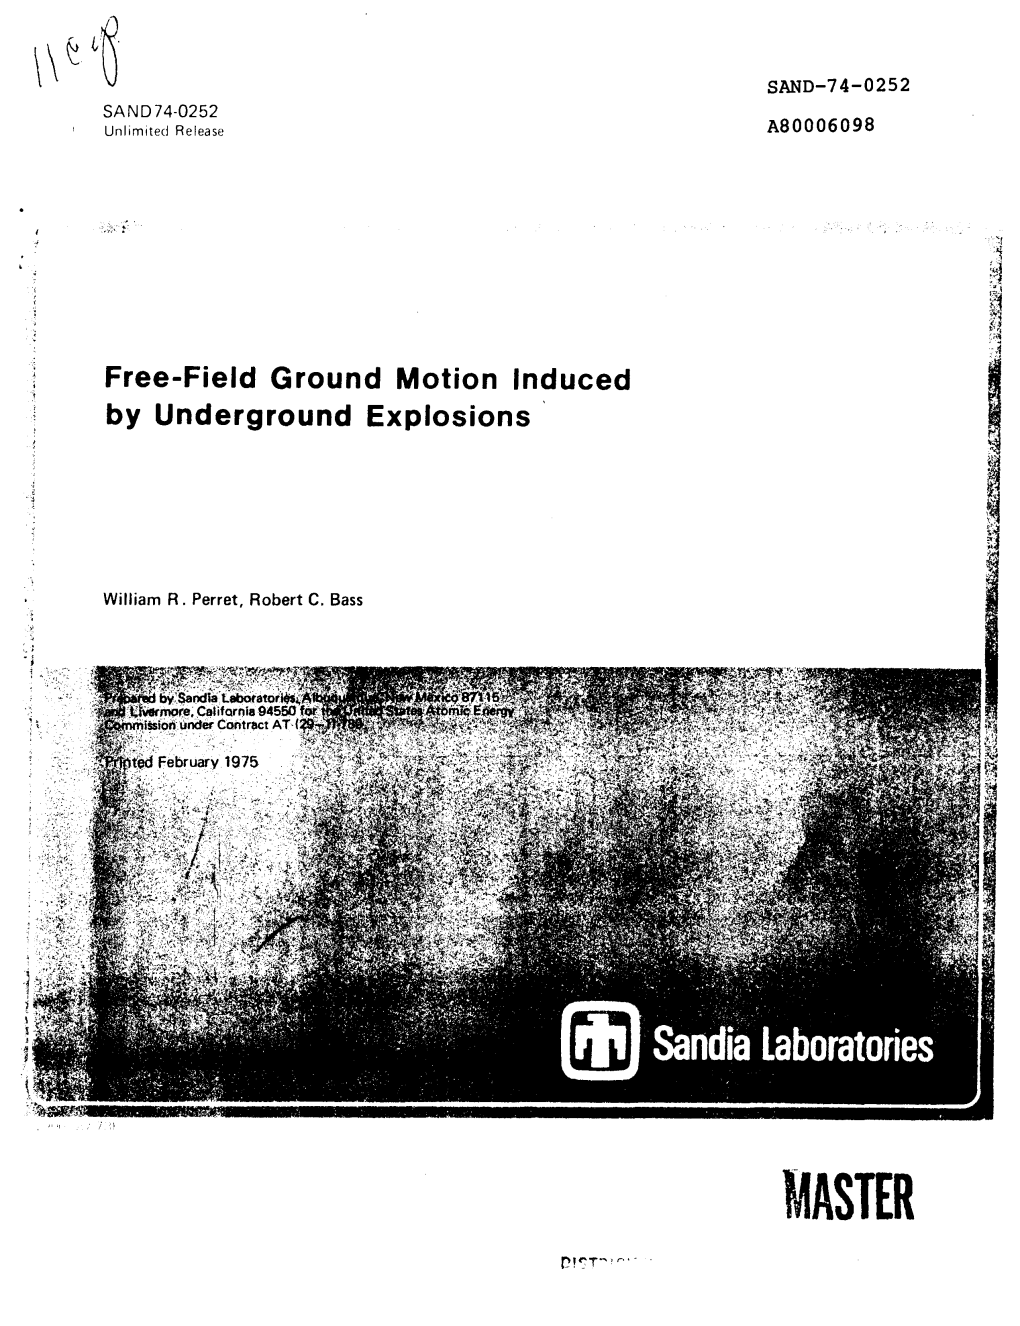 Free-Field Ground Motion Induced by Underground Explosions